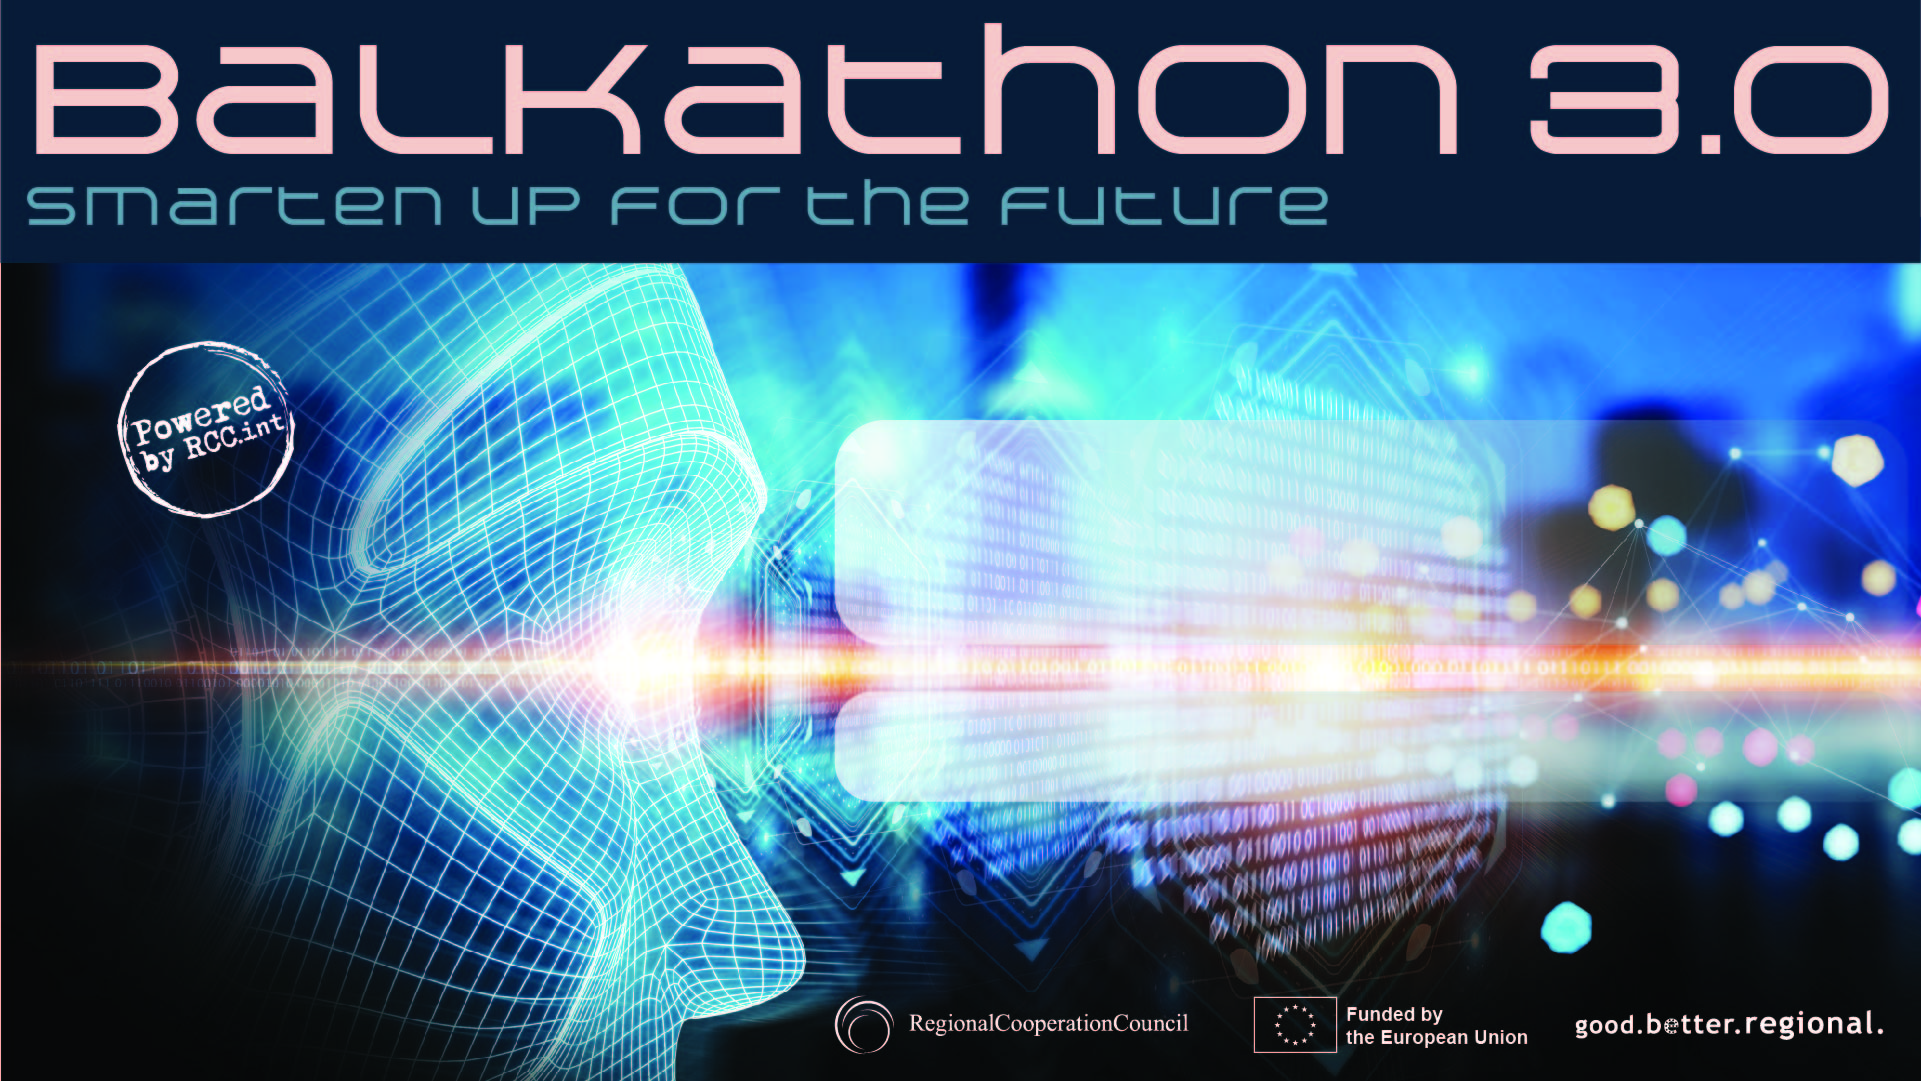 Regional Cooperation Council (RCC) launched an online competition for the best digital ideas and solutions from the Western Balkans - Balkathon 3.0 (Design: RCC/Samir Dedic)